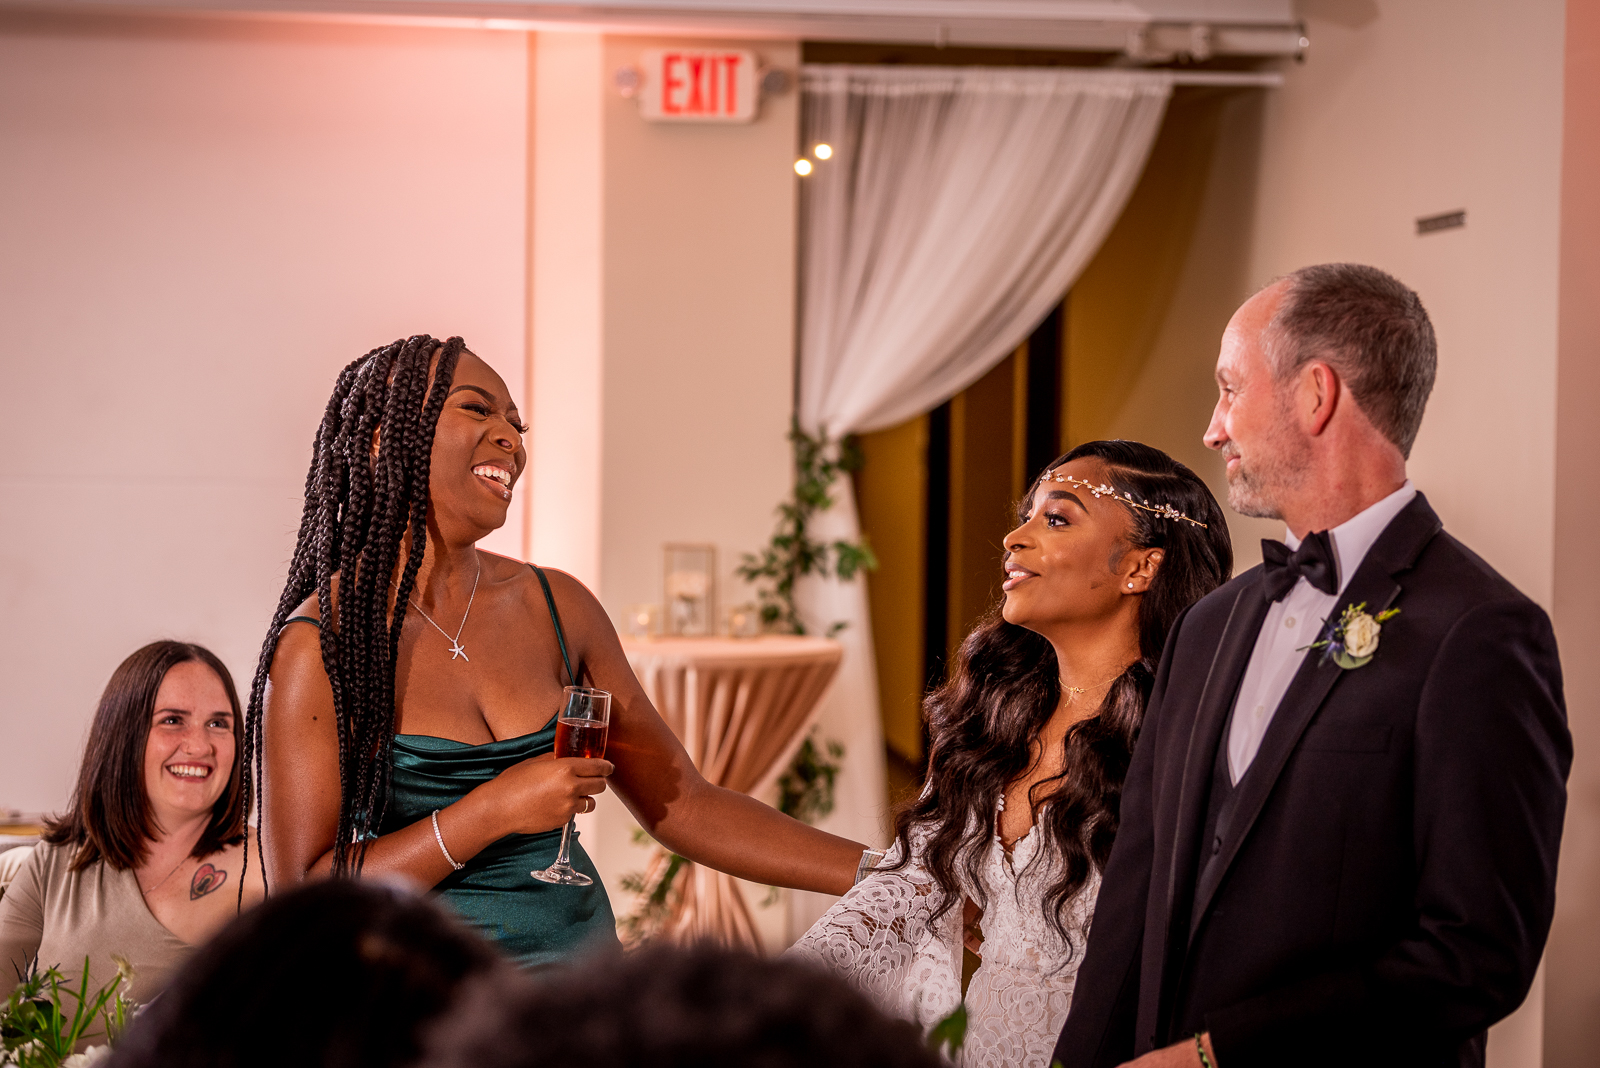 Bride and groom with bridesmaid, wedding speech, wedding toast, smile, laugh, candid wedding photo, African American wedding, pink light, pink uplighting, urban wedding reception at Penthouse Events, Ohio City, Cleveland Flats